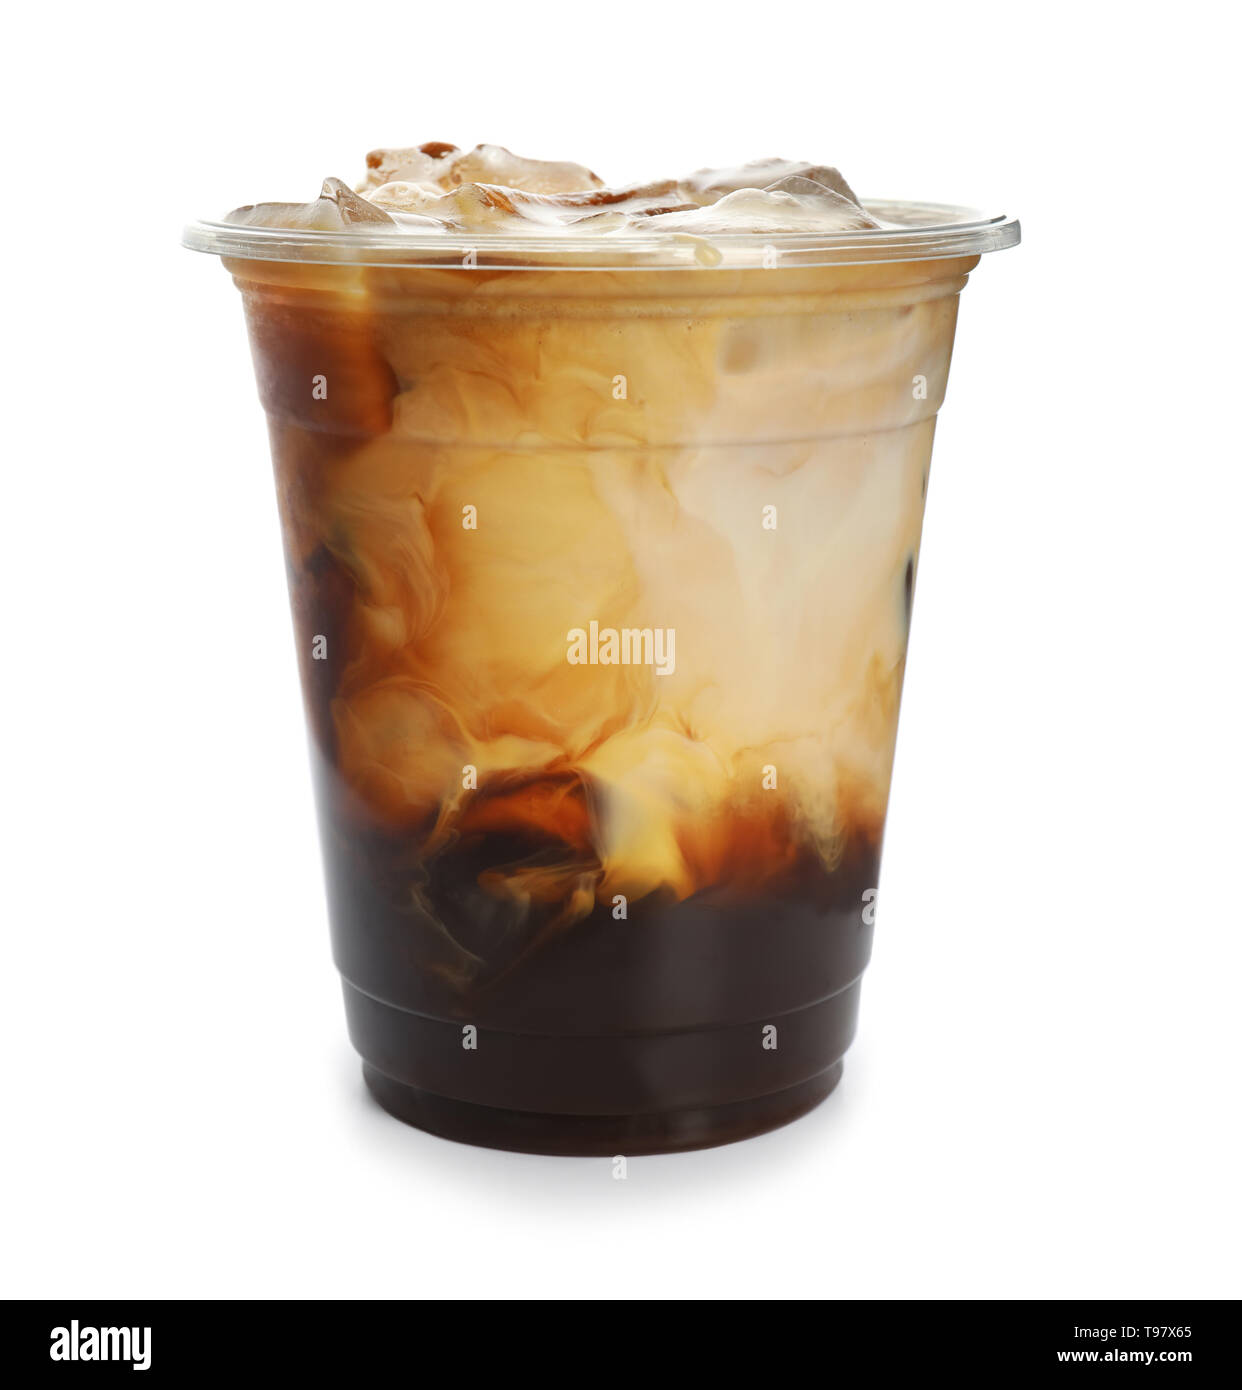 https://c8.alamy.com/comp/T97X65/plastic-cup-of-cold-coffee-on-white-background-T97X65.jpg